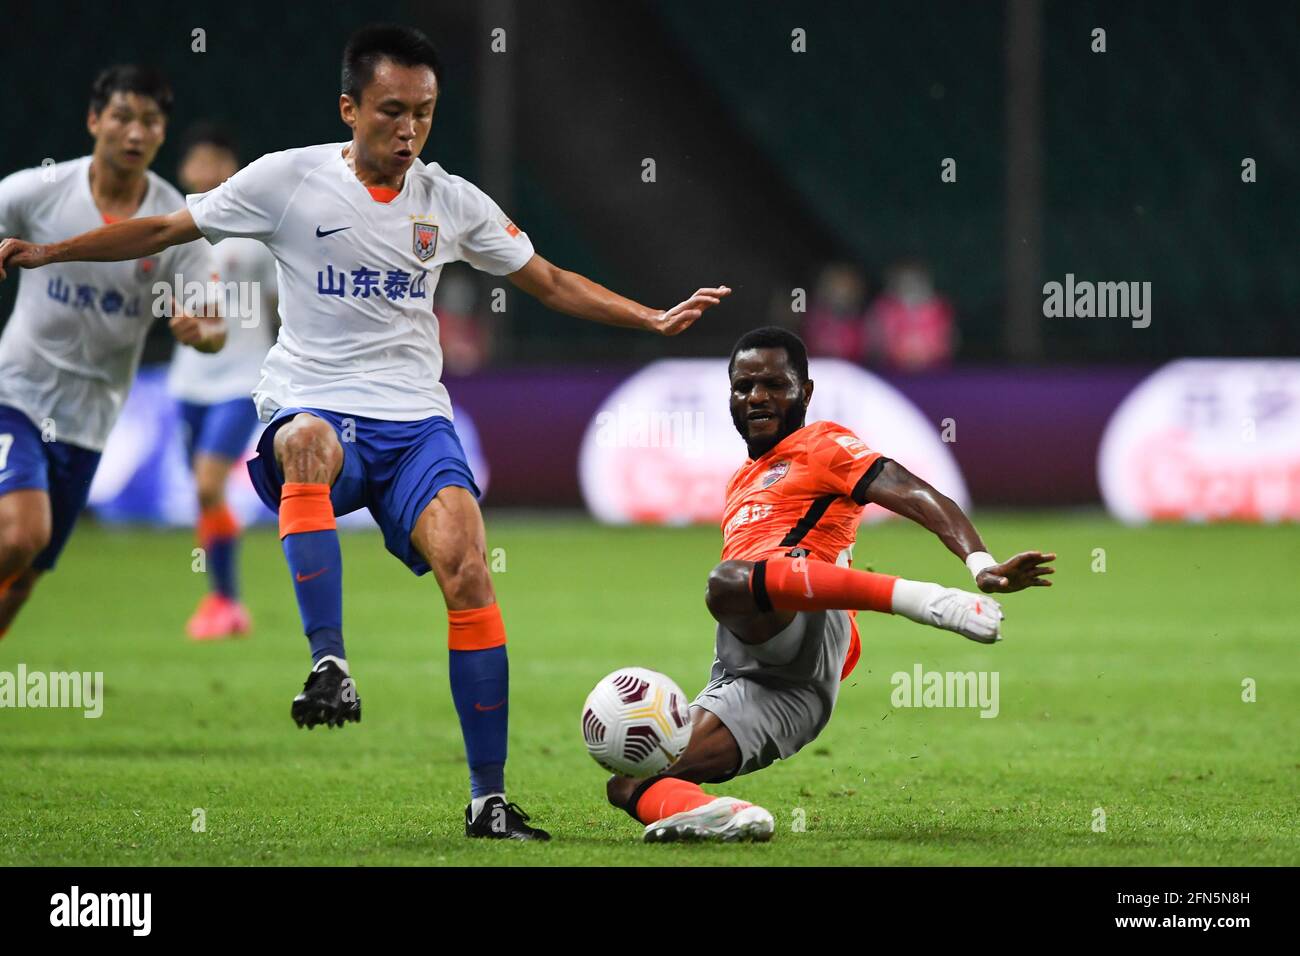 Guangzhou. 14th May, 2021. Mubarak Wakaso (R) of Shenzhen FC competes during the 5th round match between Shenzhen FC and Shandong Taishan at the 2021 season Chinese Football Association Super League (CSL) Guangzhou Division in Guangzhou, south China's Guangdong Province, May 14, 2021. Credit: Xinhua/Alamy Live News Stock Photo